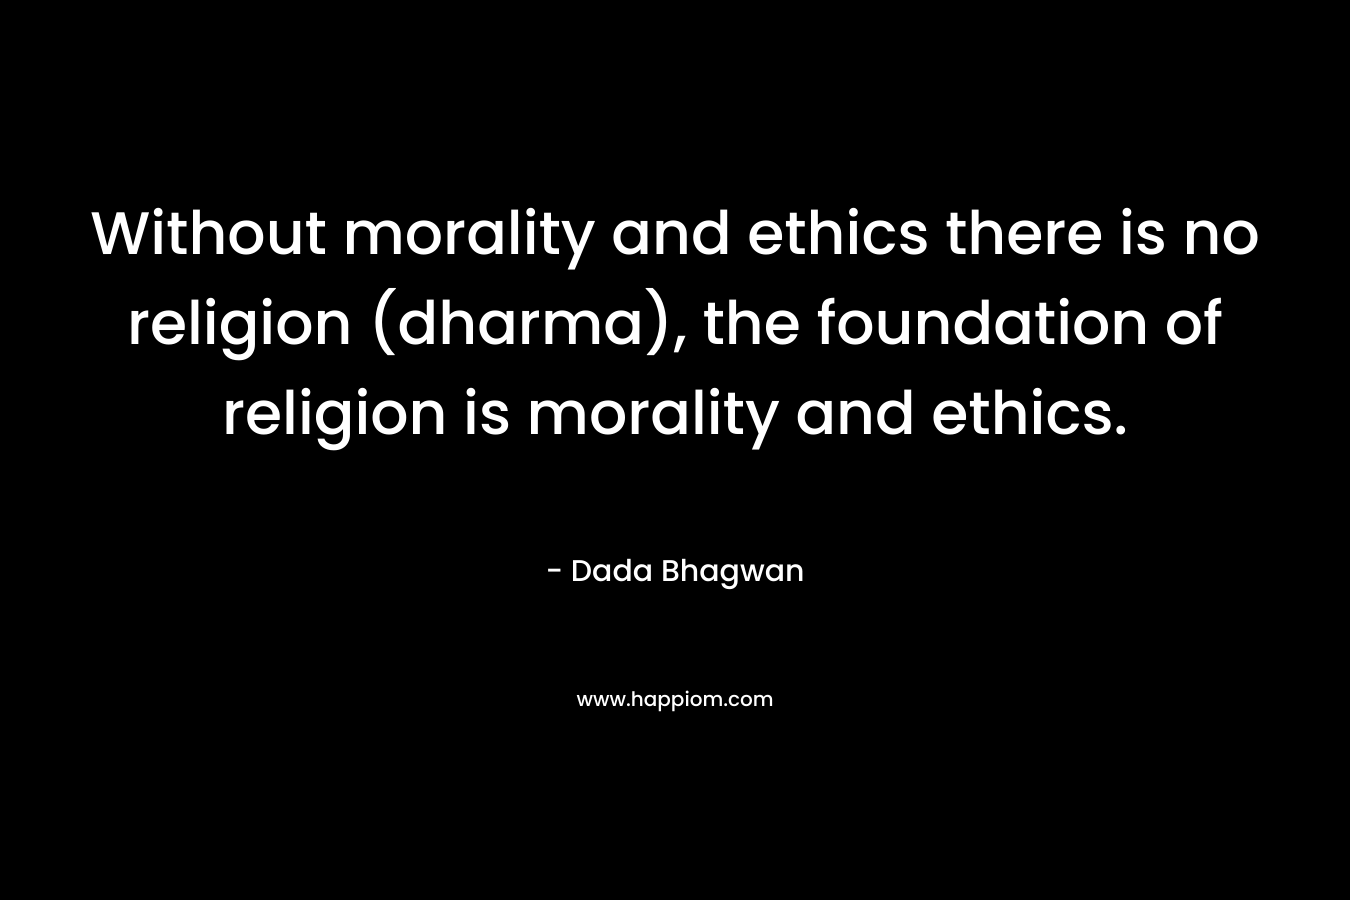 Without morality and ethics there is no religion (dharma), the foundation of religion is morality and ethics.